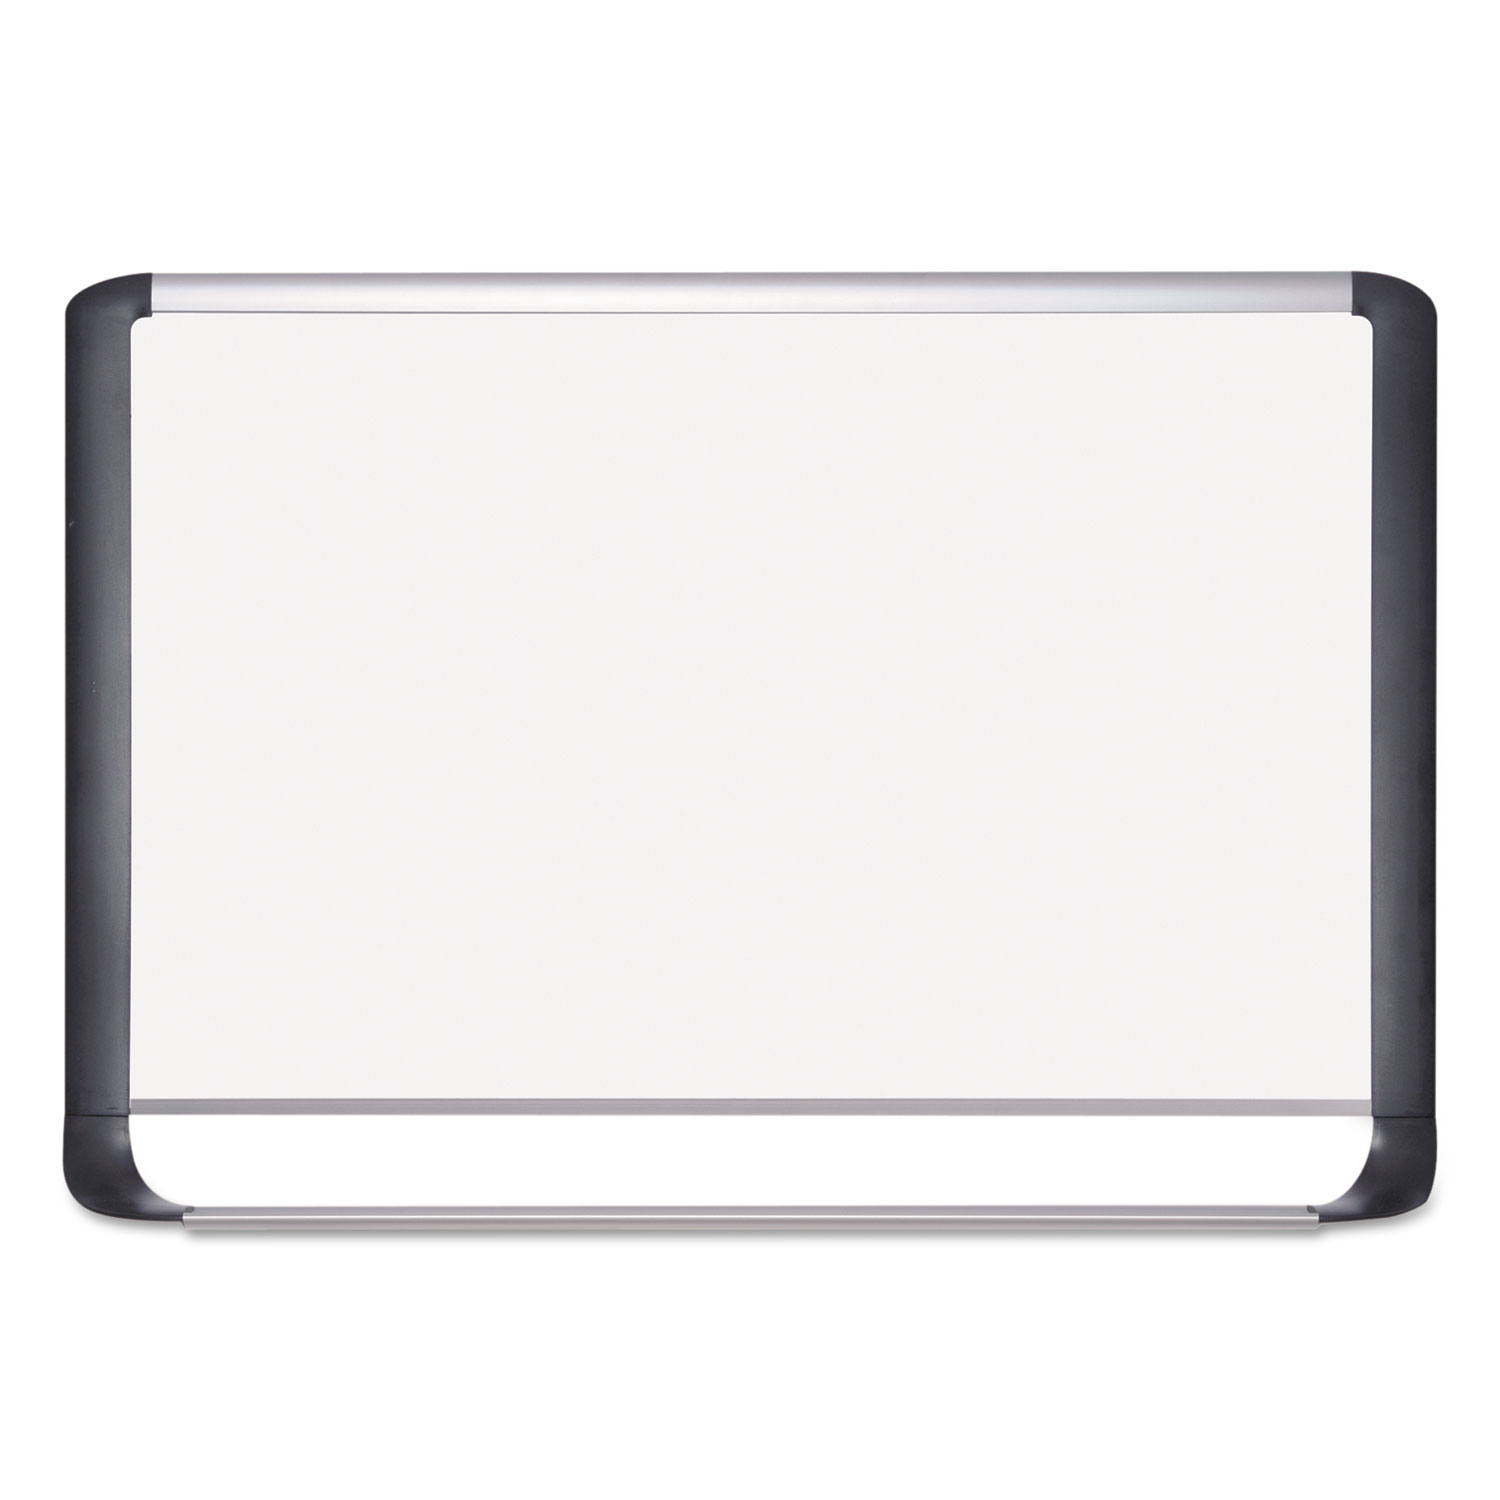 Lacquered steel magnetic dry erase board, 48 x 96, Silver/Black